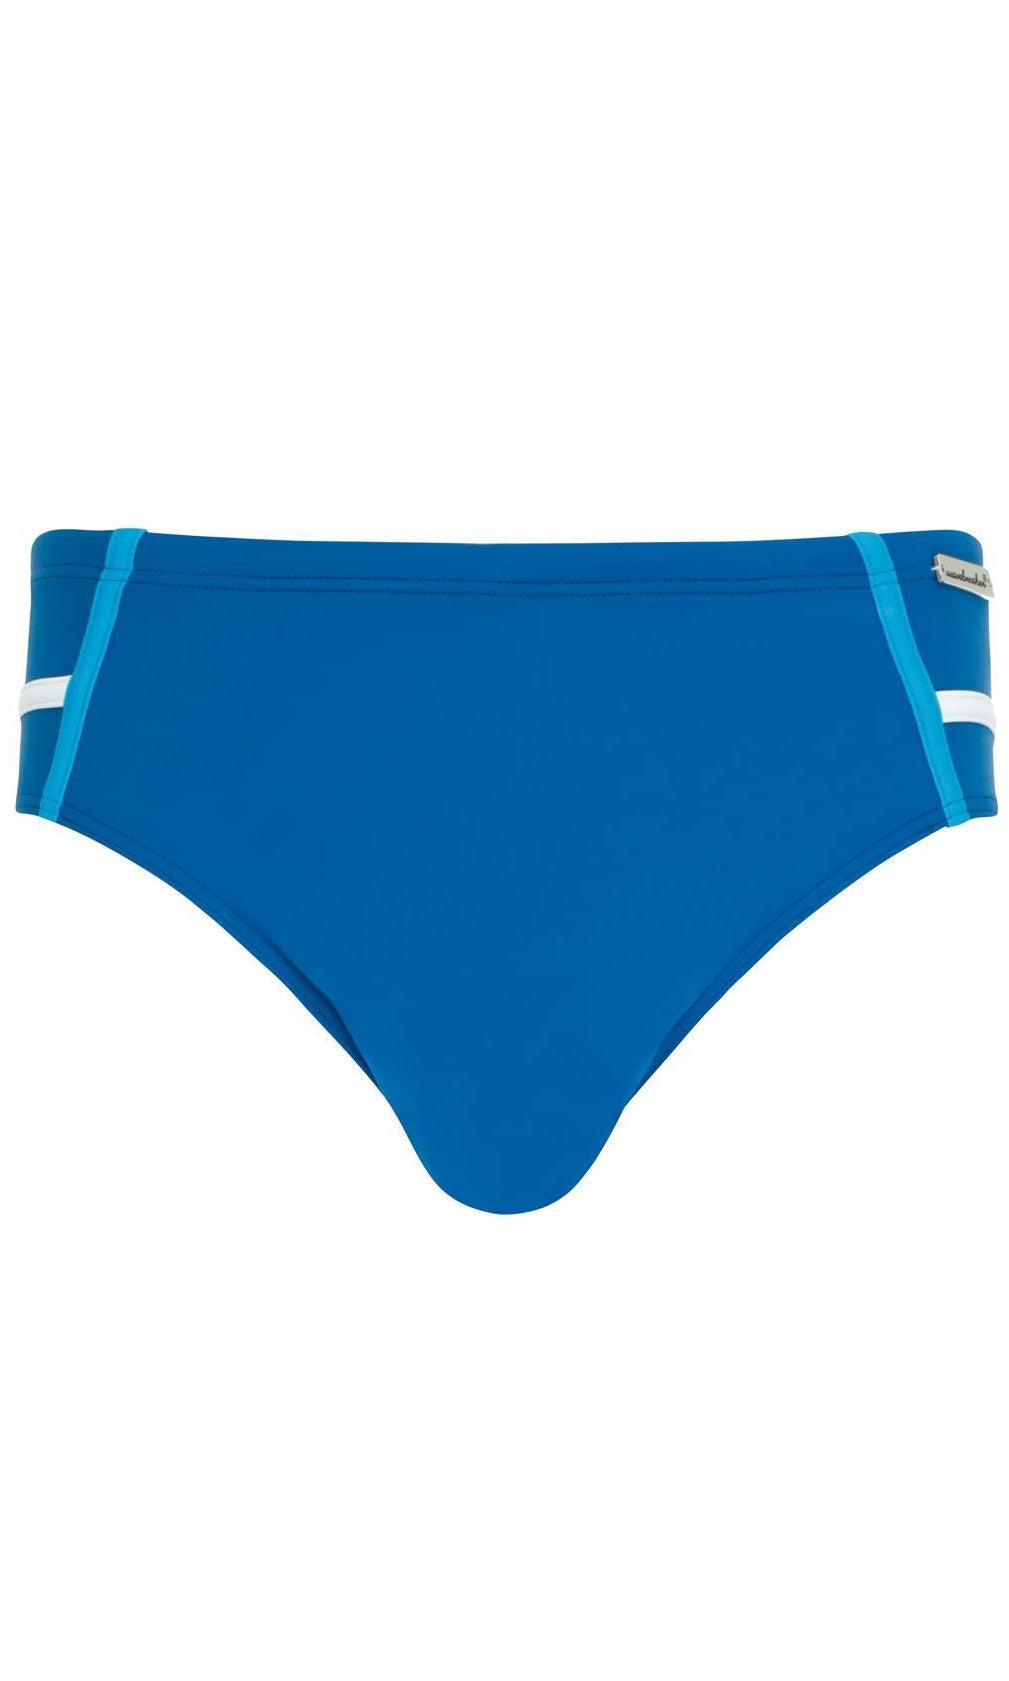 Classic Blues Trunks, More Colours, Special Order S - L